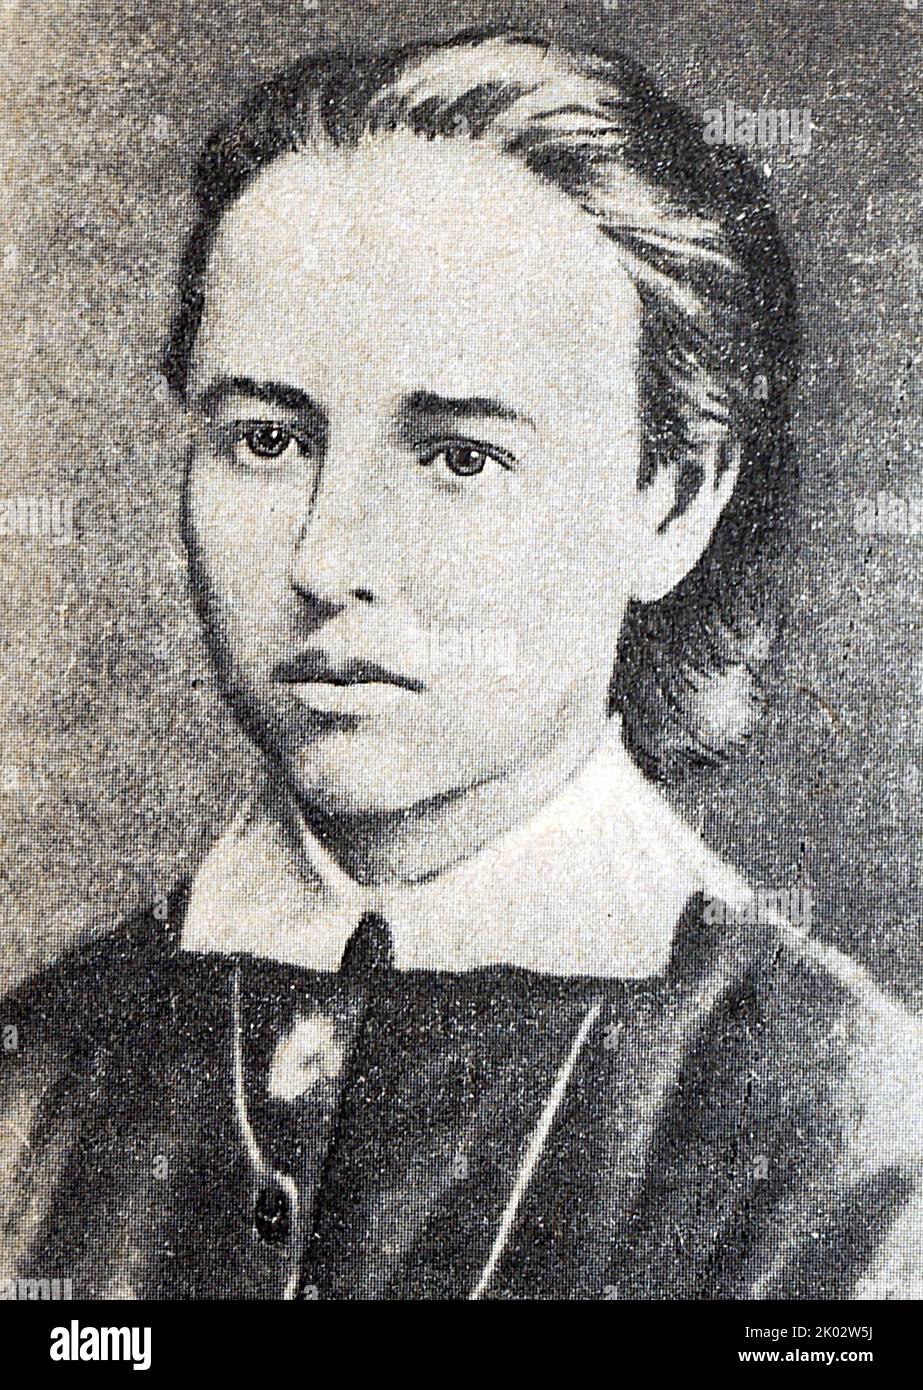 Sofia Lvovna Perova (1853-1881). Russian revolutionary and a member of the nihilist revolutionary organization Narodnaya Volya. She helped orchestrate the successful assassination of Alexander II of Russia, for which she was executed by hanging. Stock Photo